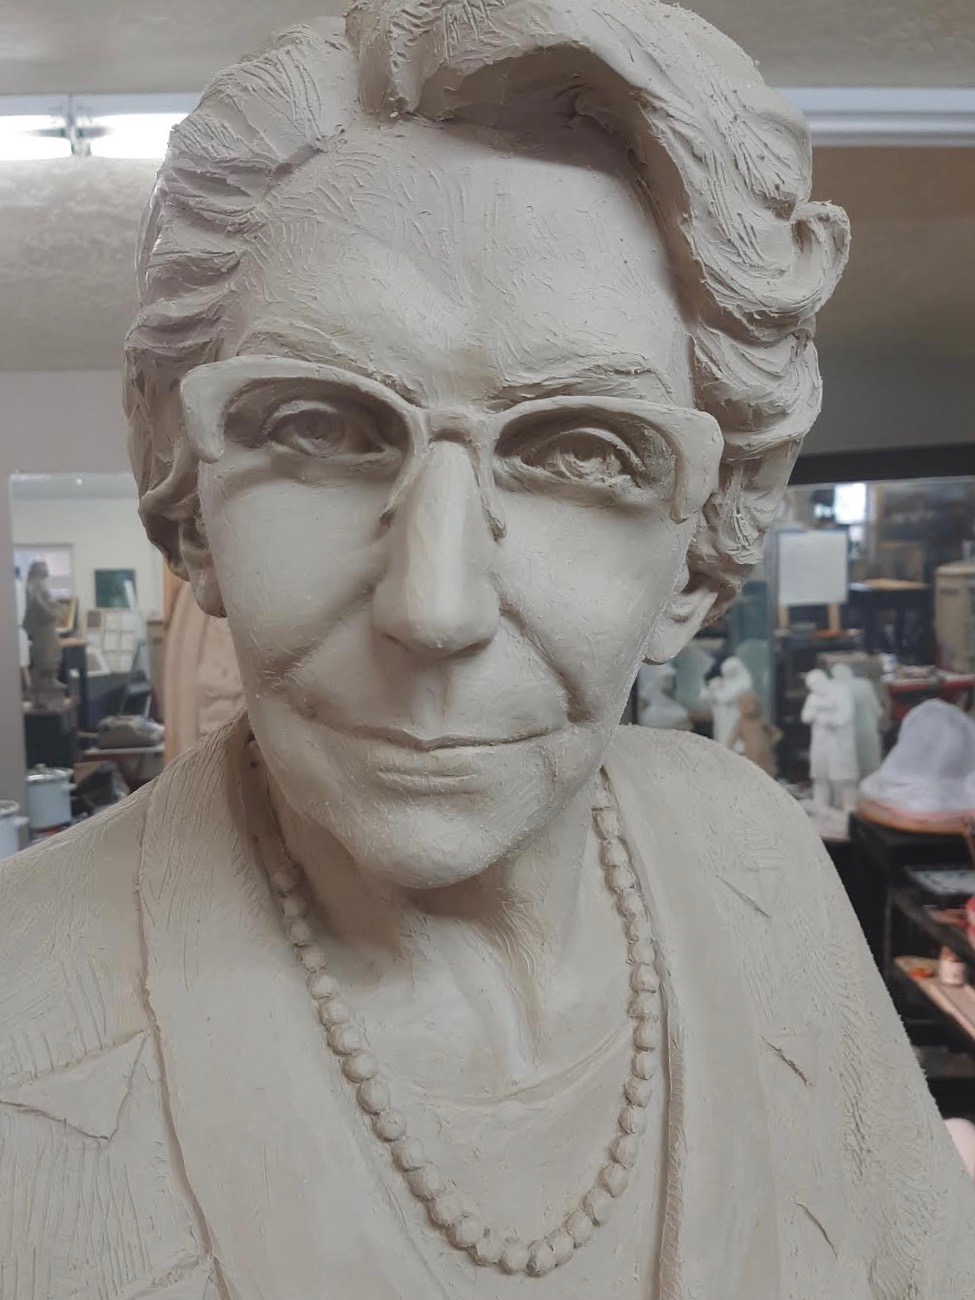 The face on the full size clay model of the Juanita Brooks statue